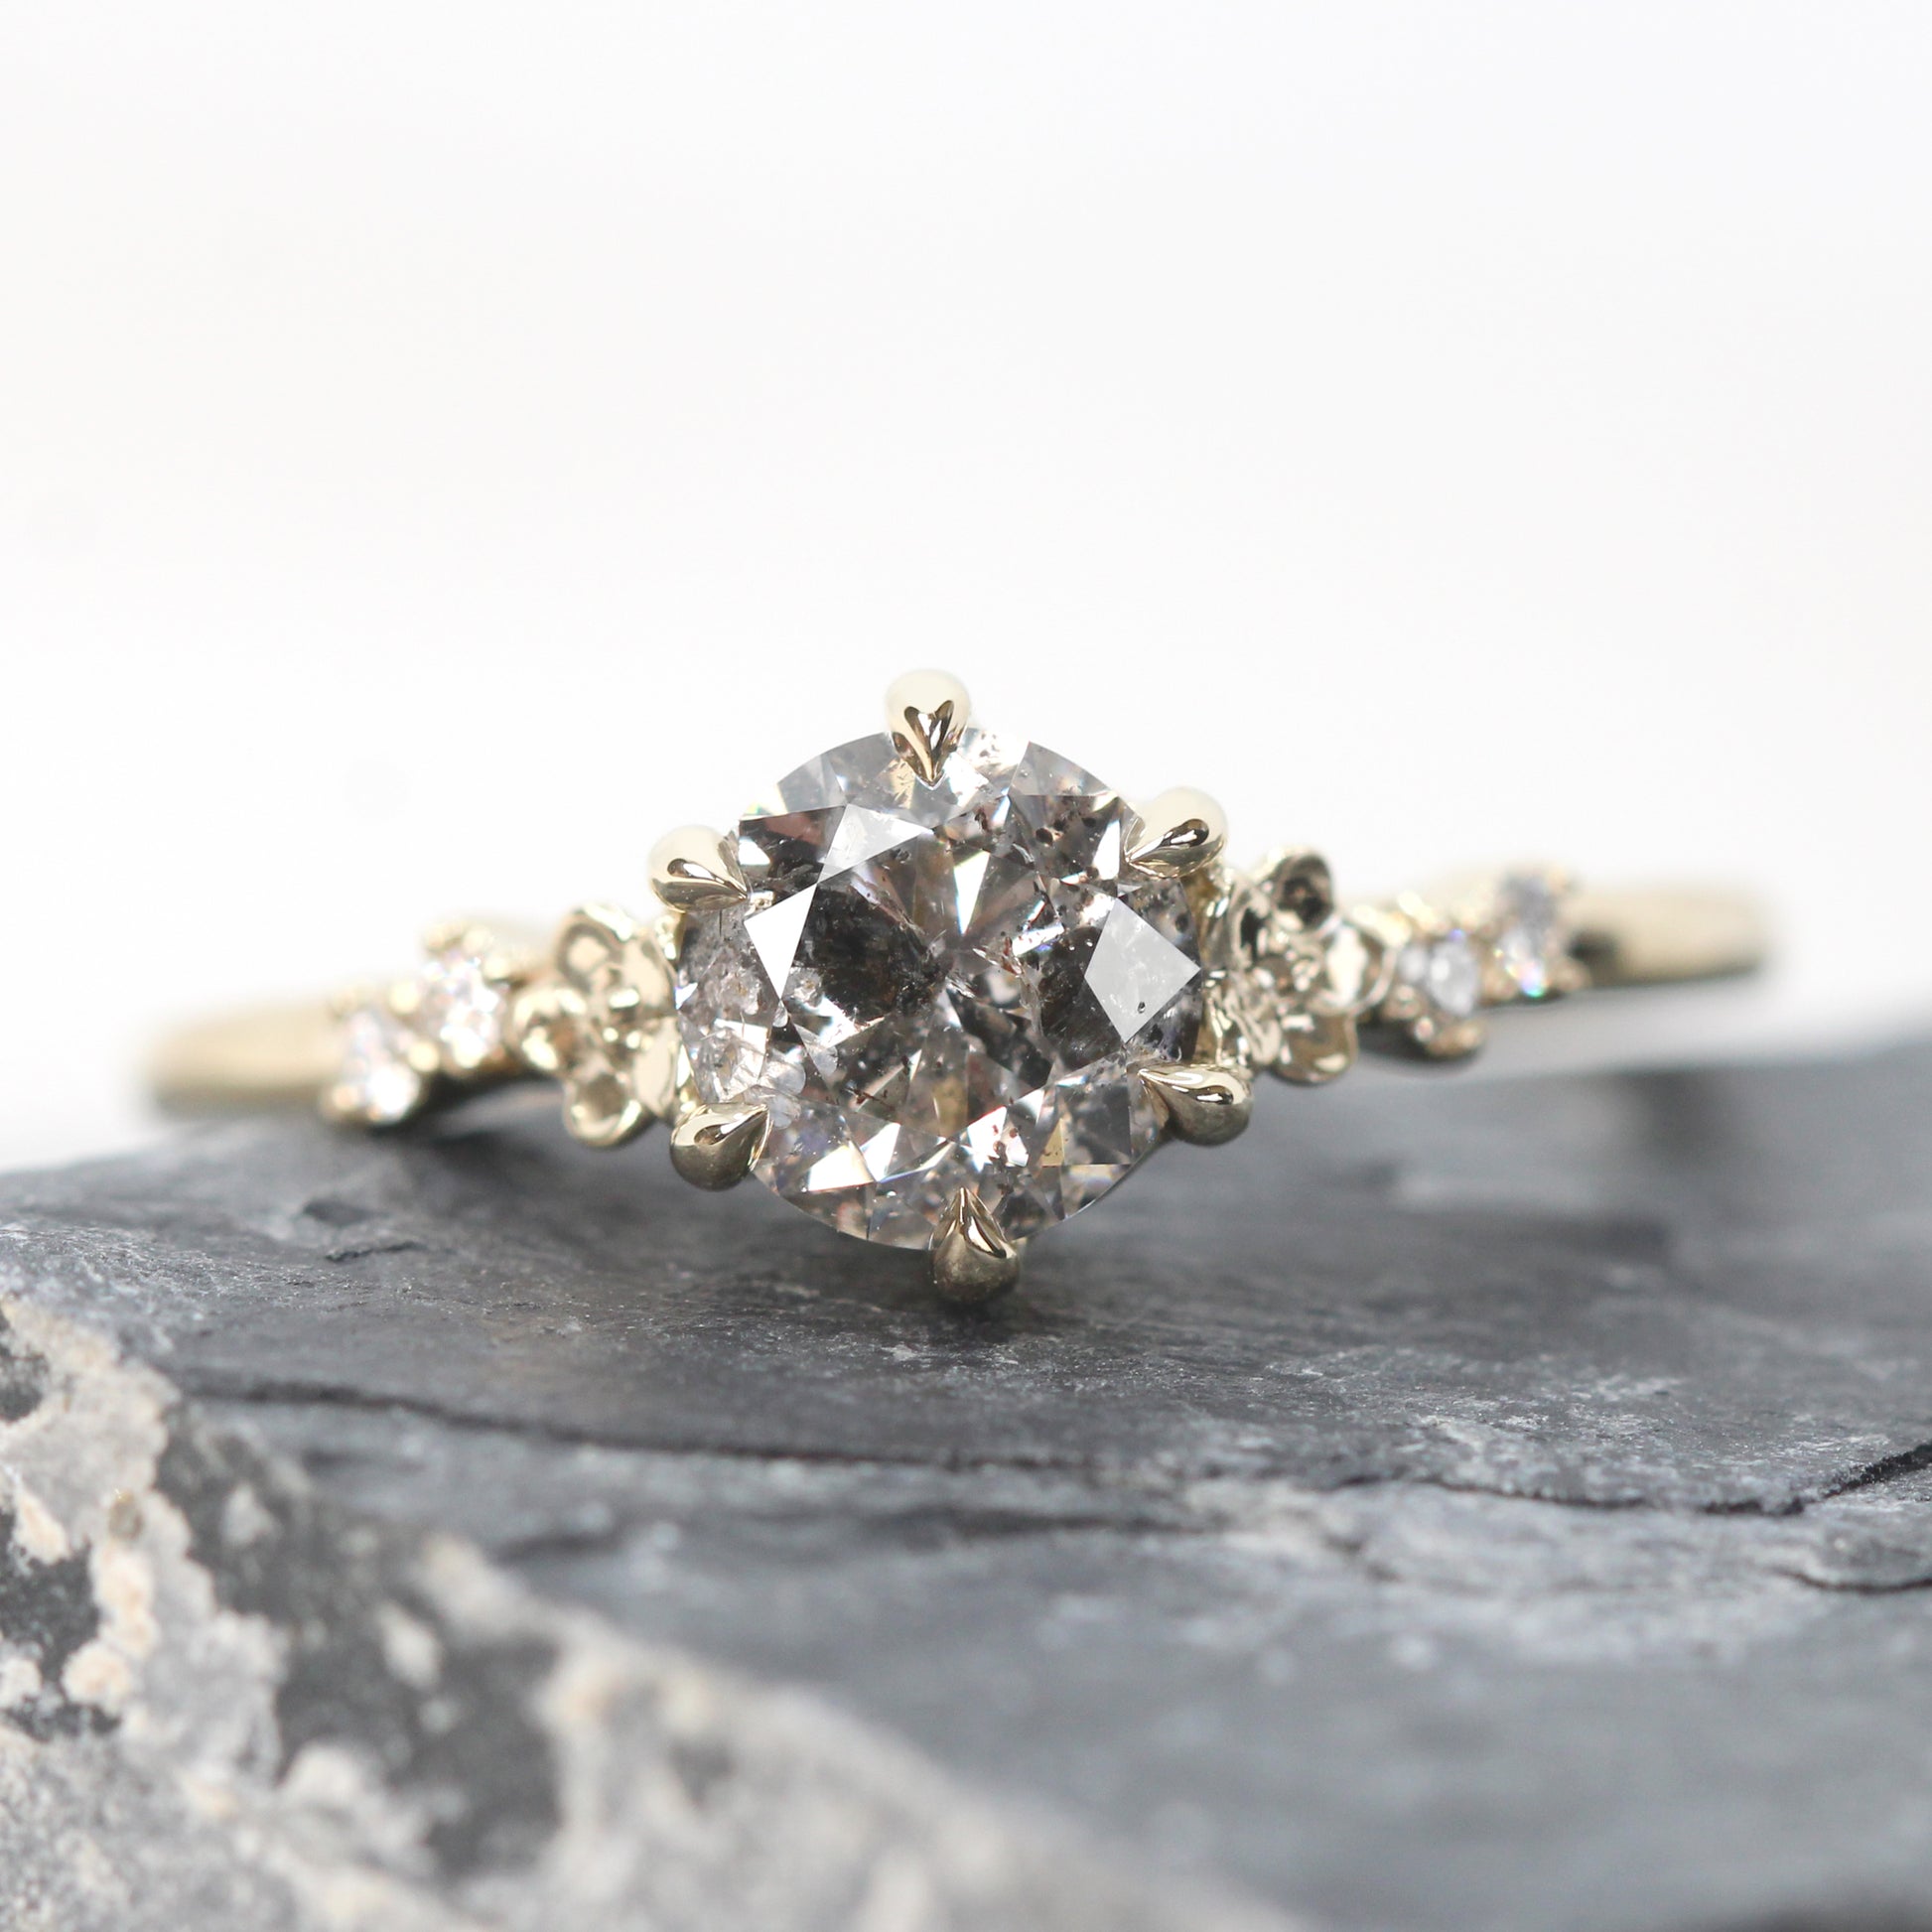 Meadow Ring with a 1.00 Carat Round Dark Gray Salt and Pepper Diamond and White Accent Diamonds in 14k Yellow Gold - Ready to Size and Ship - Midwinter Co. Alternative Bridal Rings and Modern Fine Jewelry